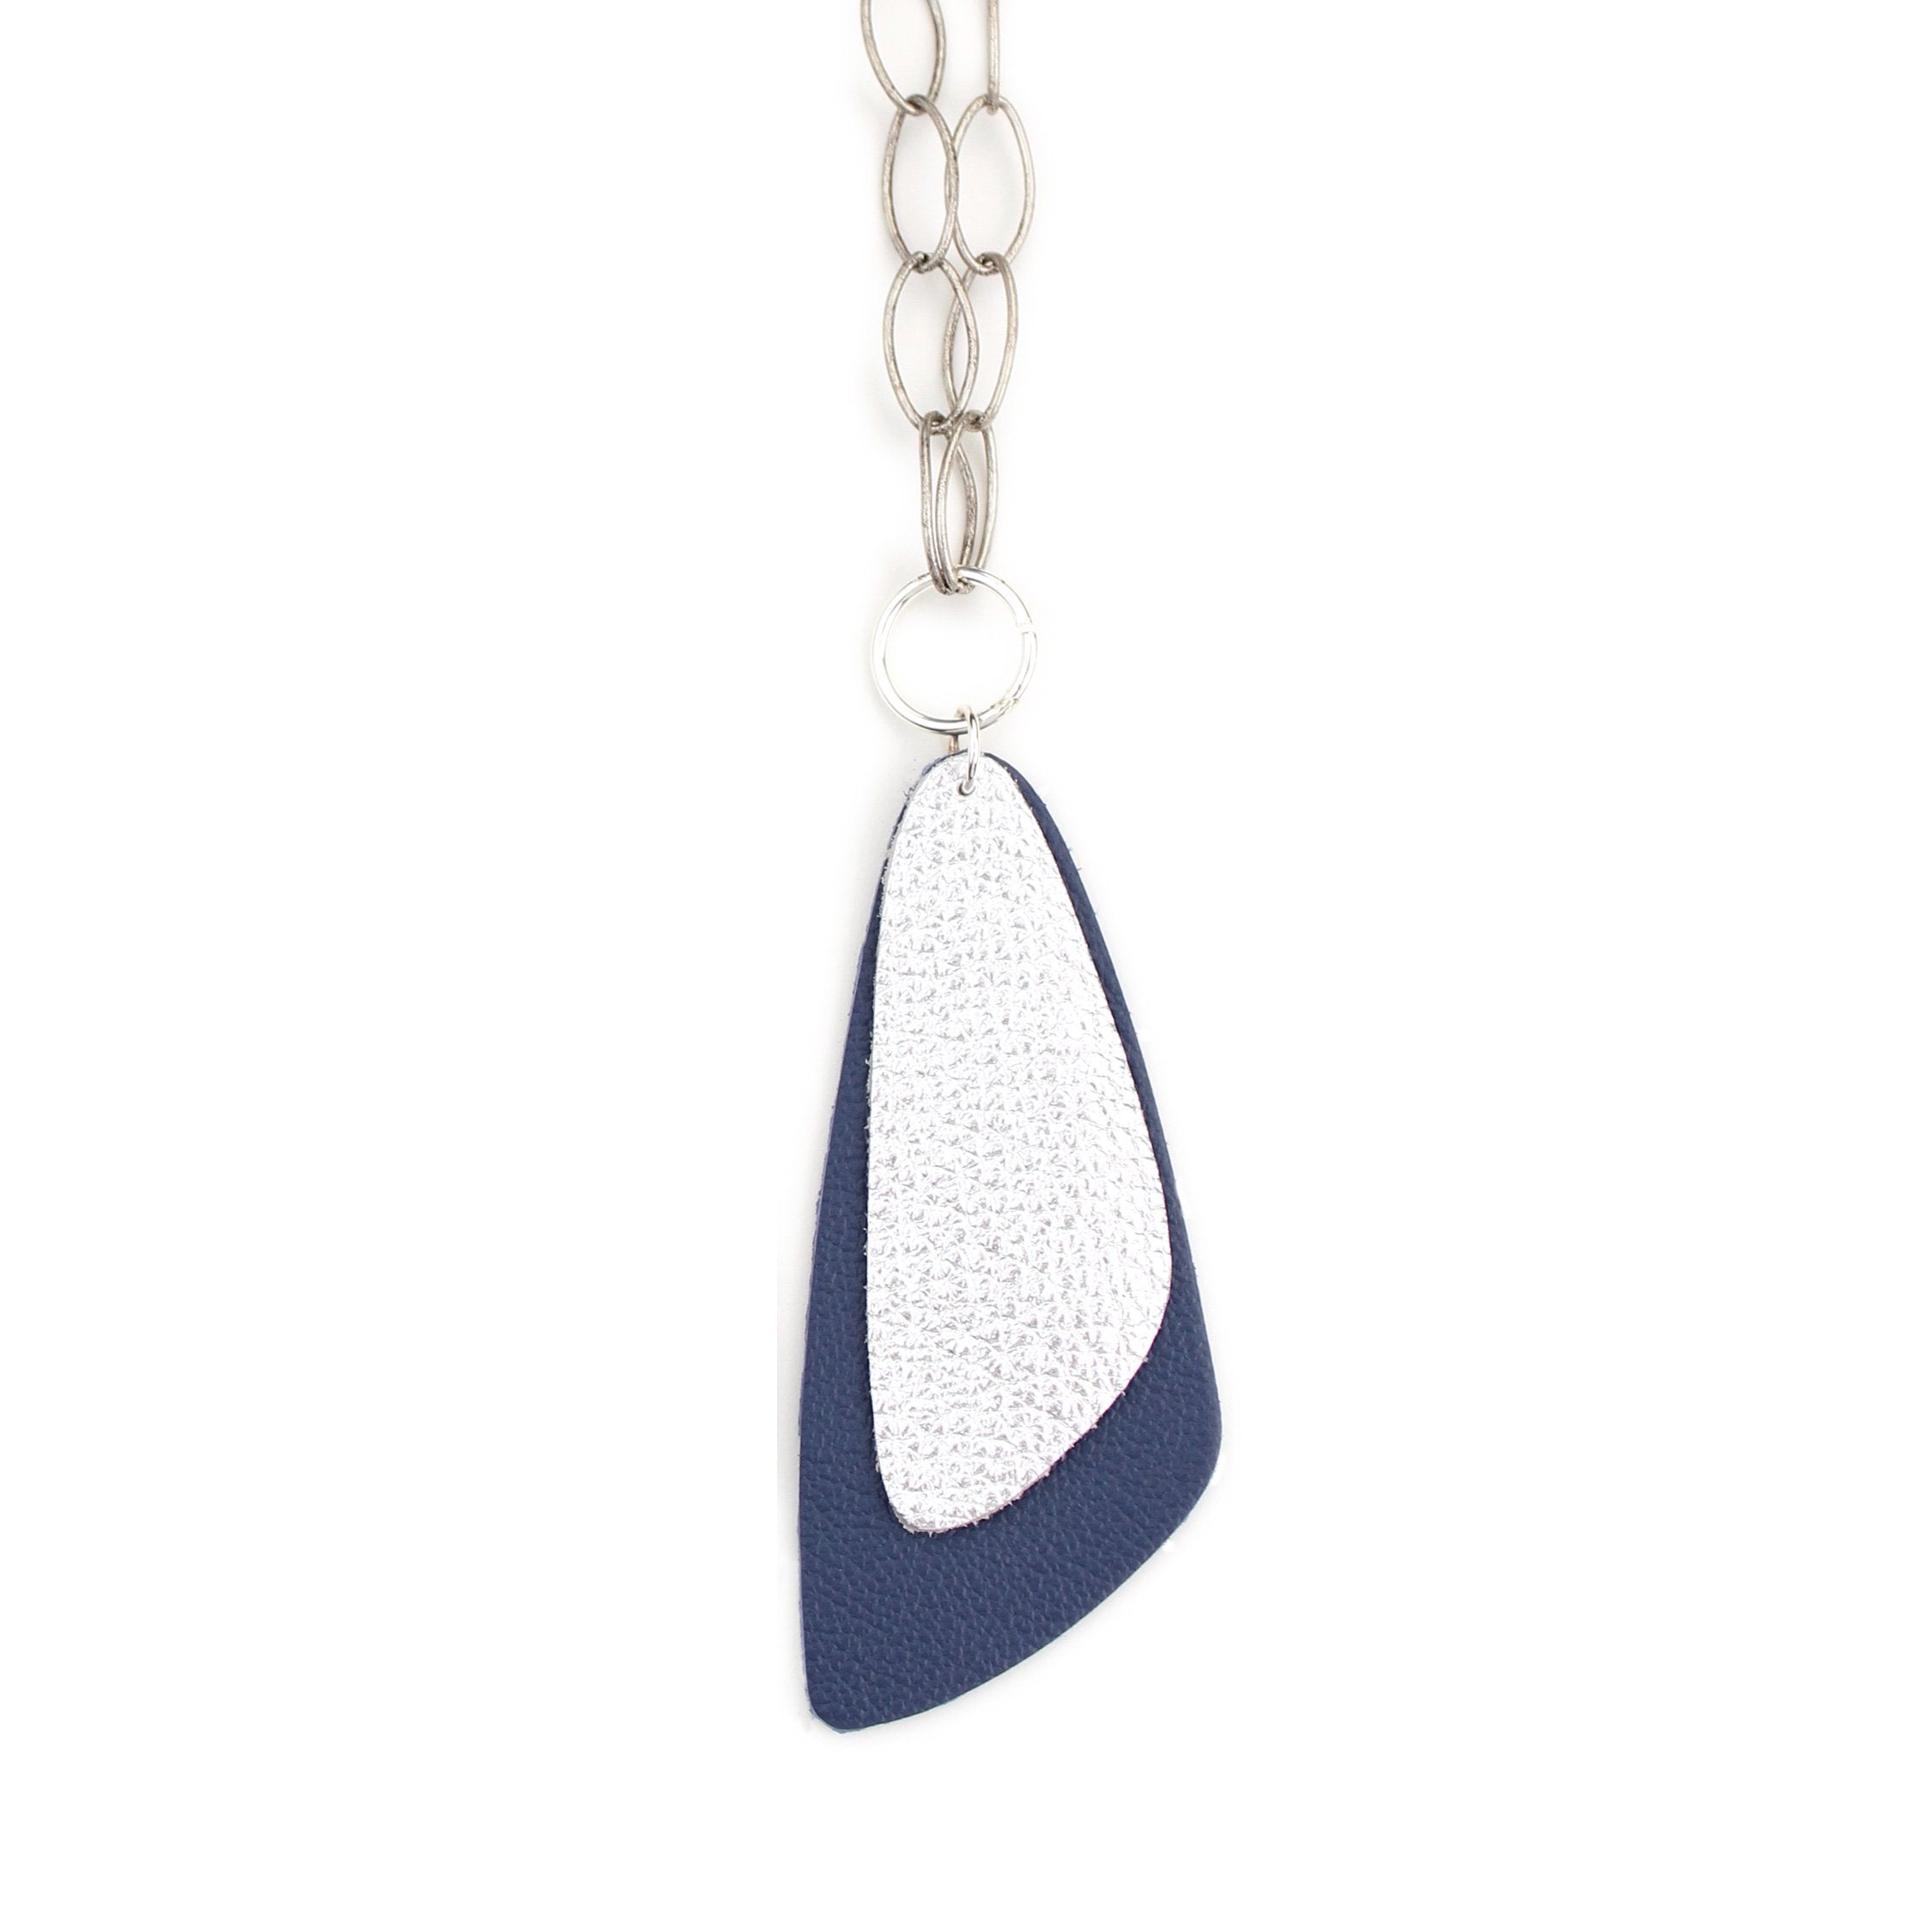 the double descent necklace - shiny silver over navy